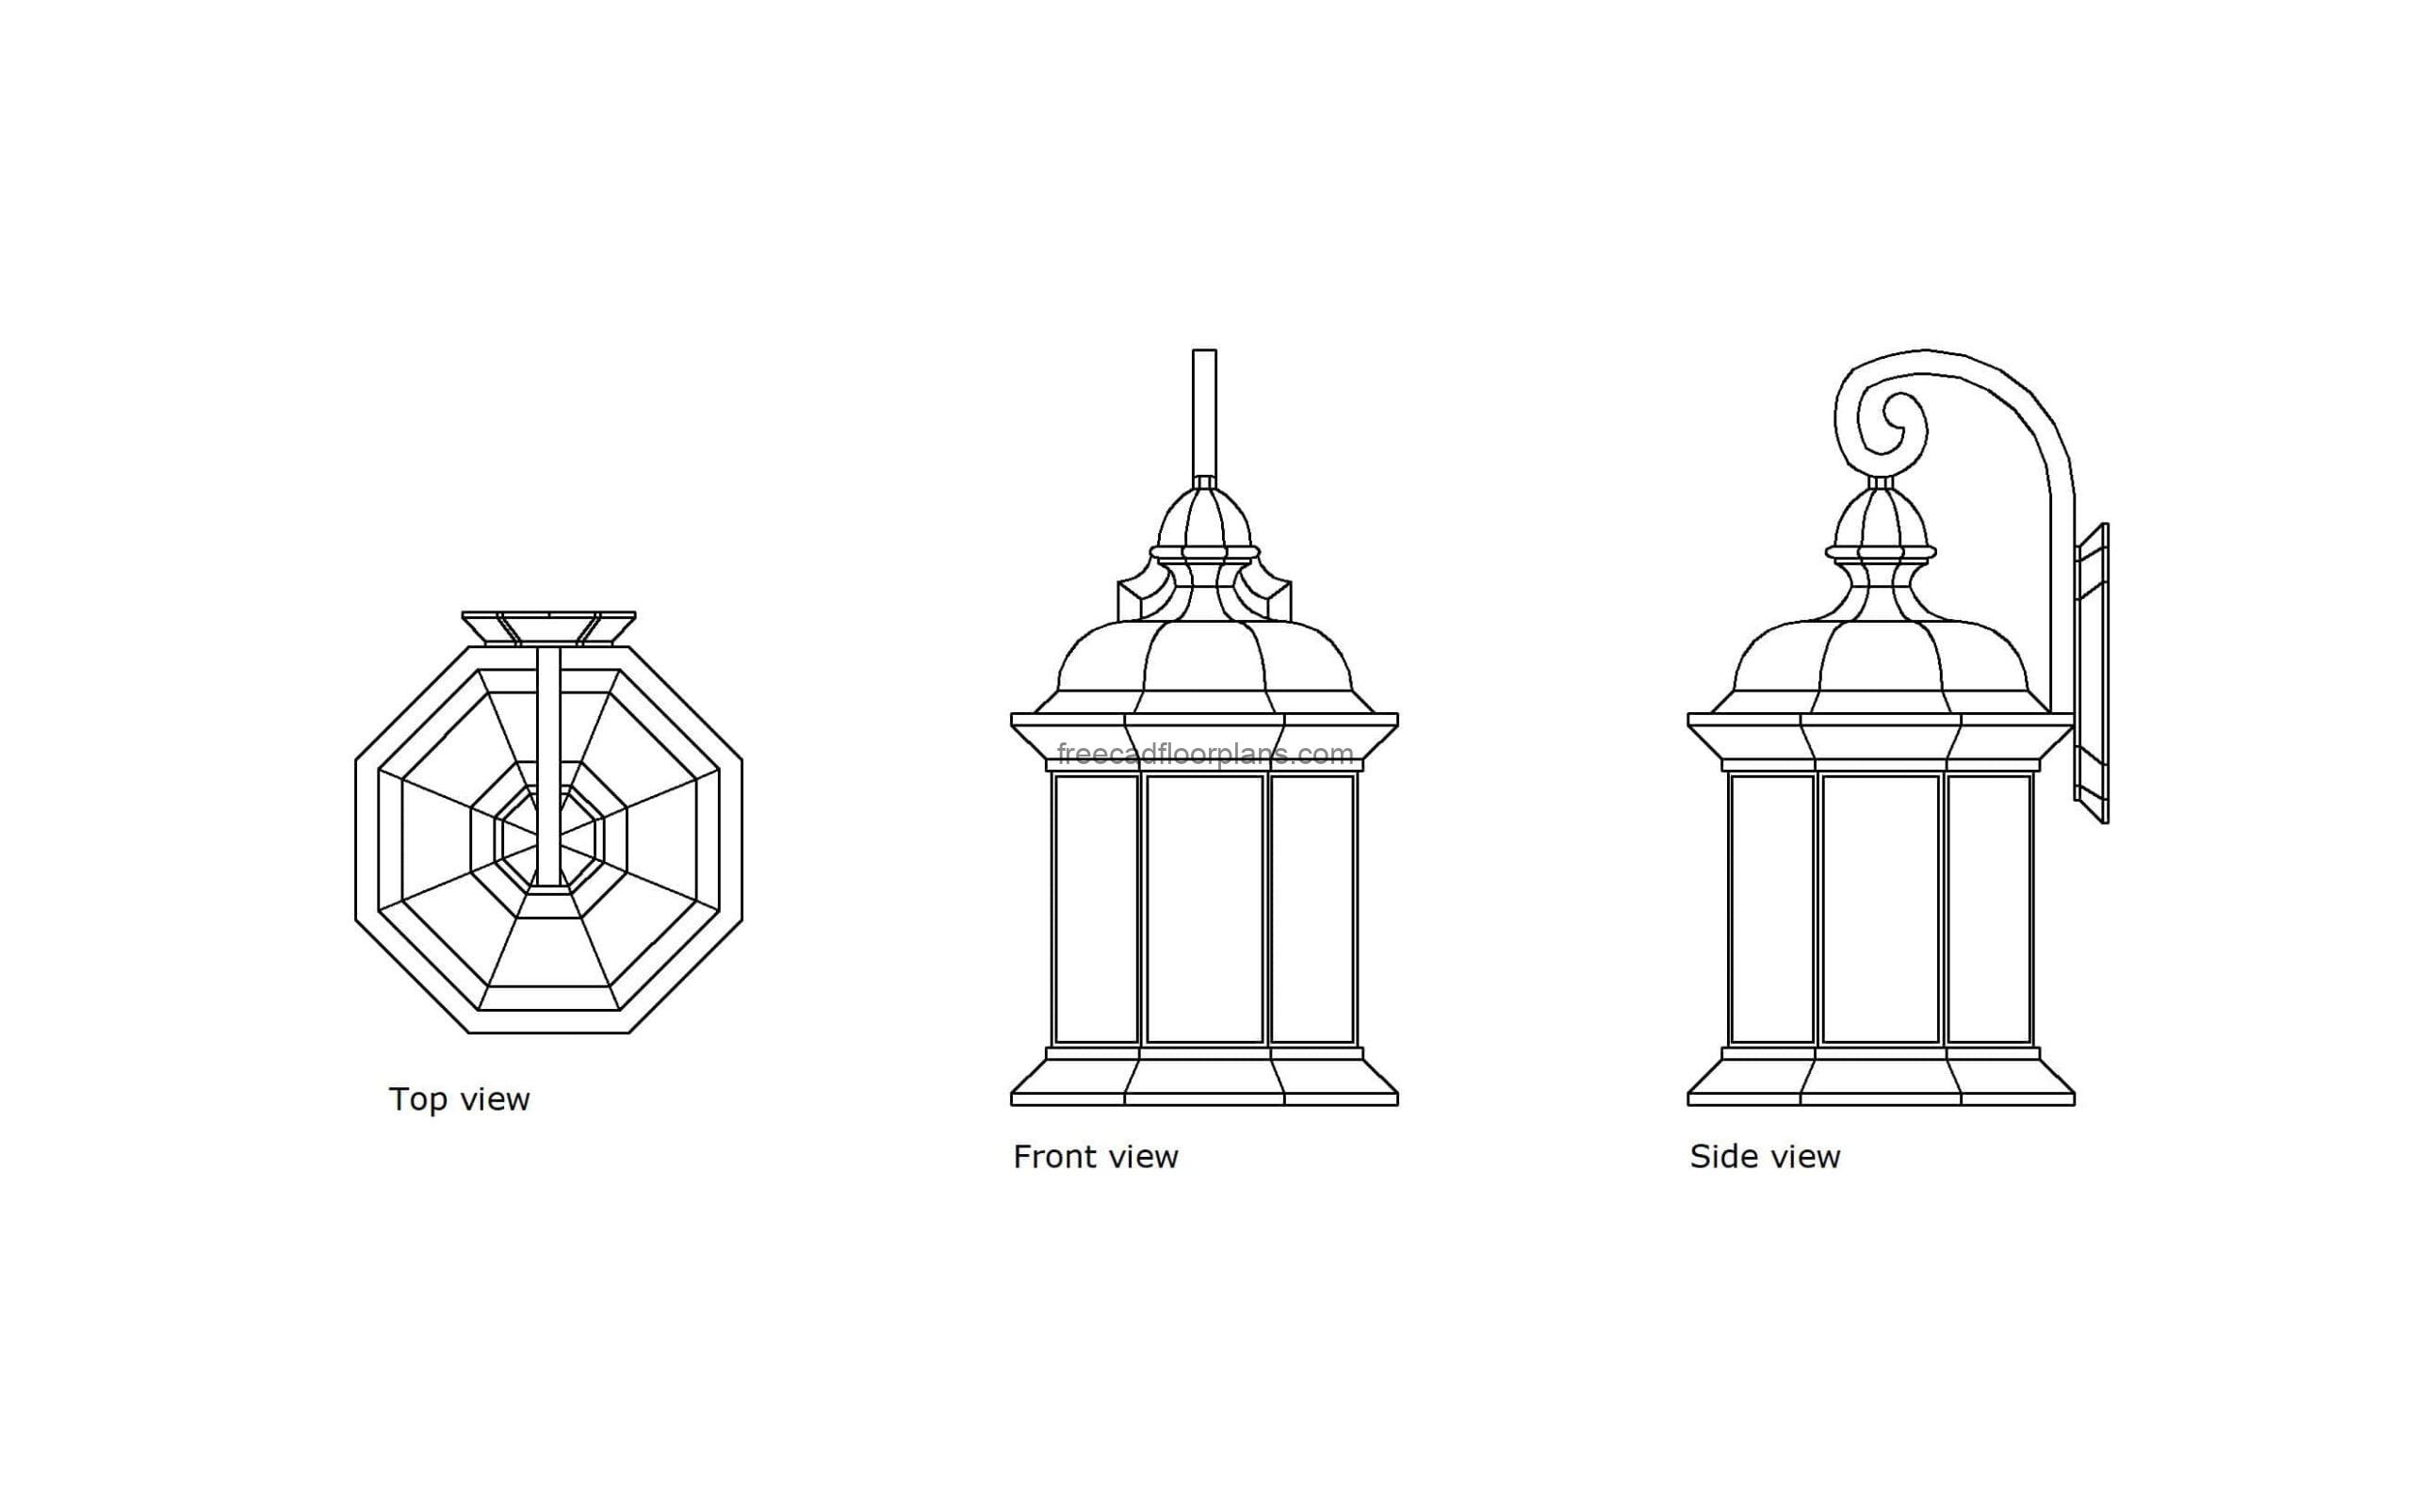 autocad drawing of a carriage light, plan and elevation 2d views, dwg file free for download